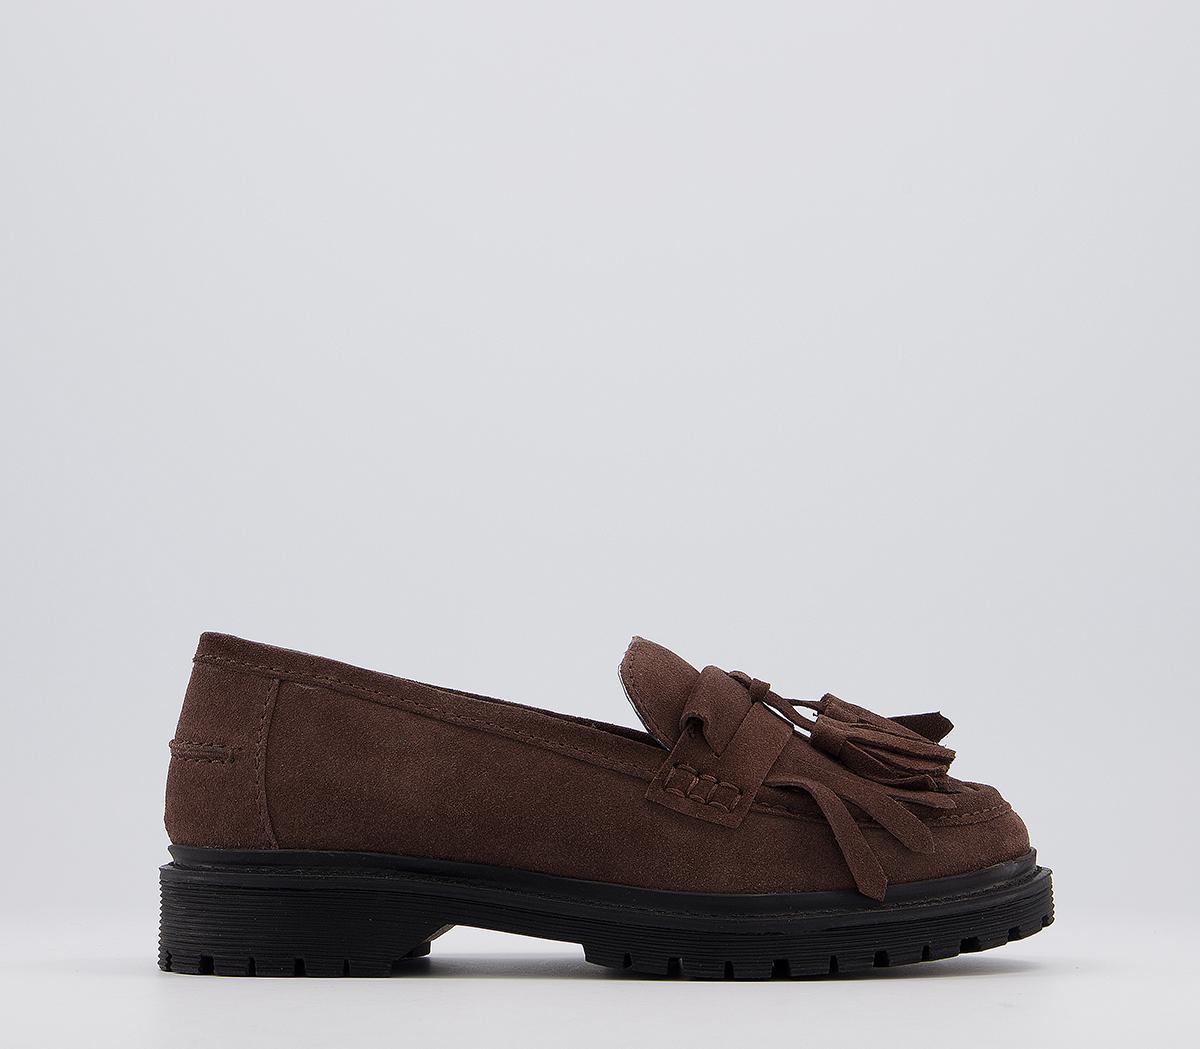 OfficeFringe Cleated LoafersBrown Suede